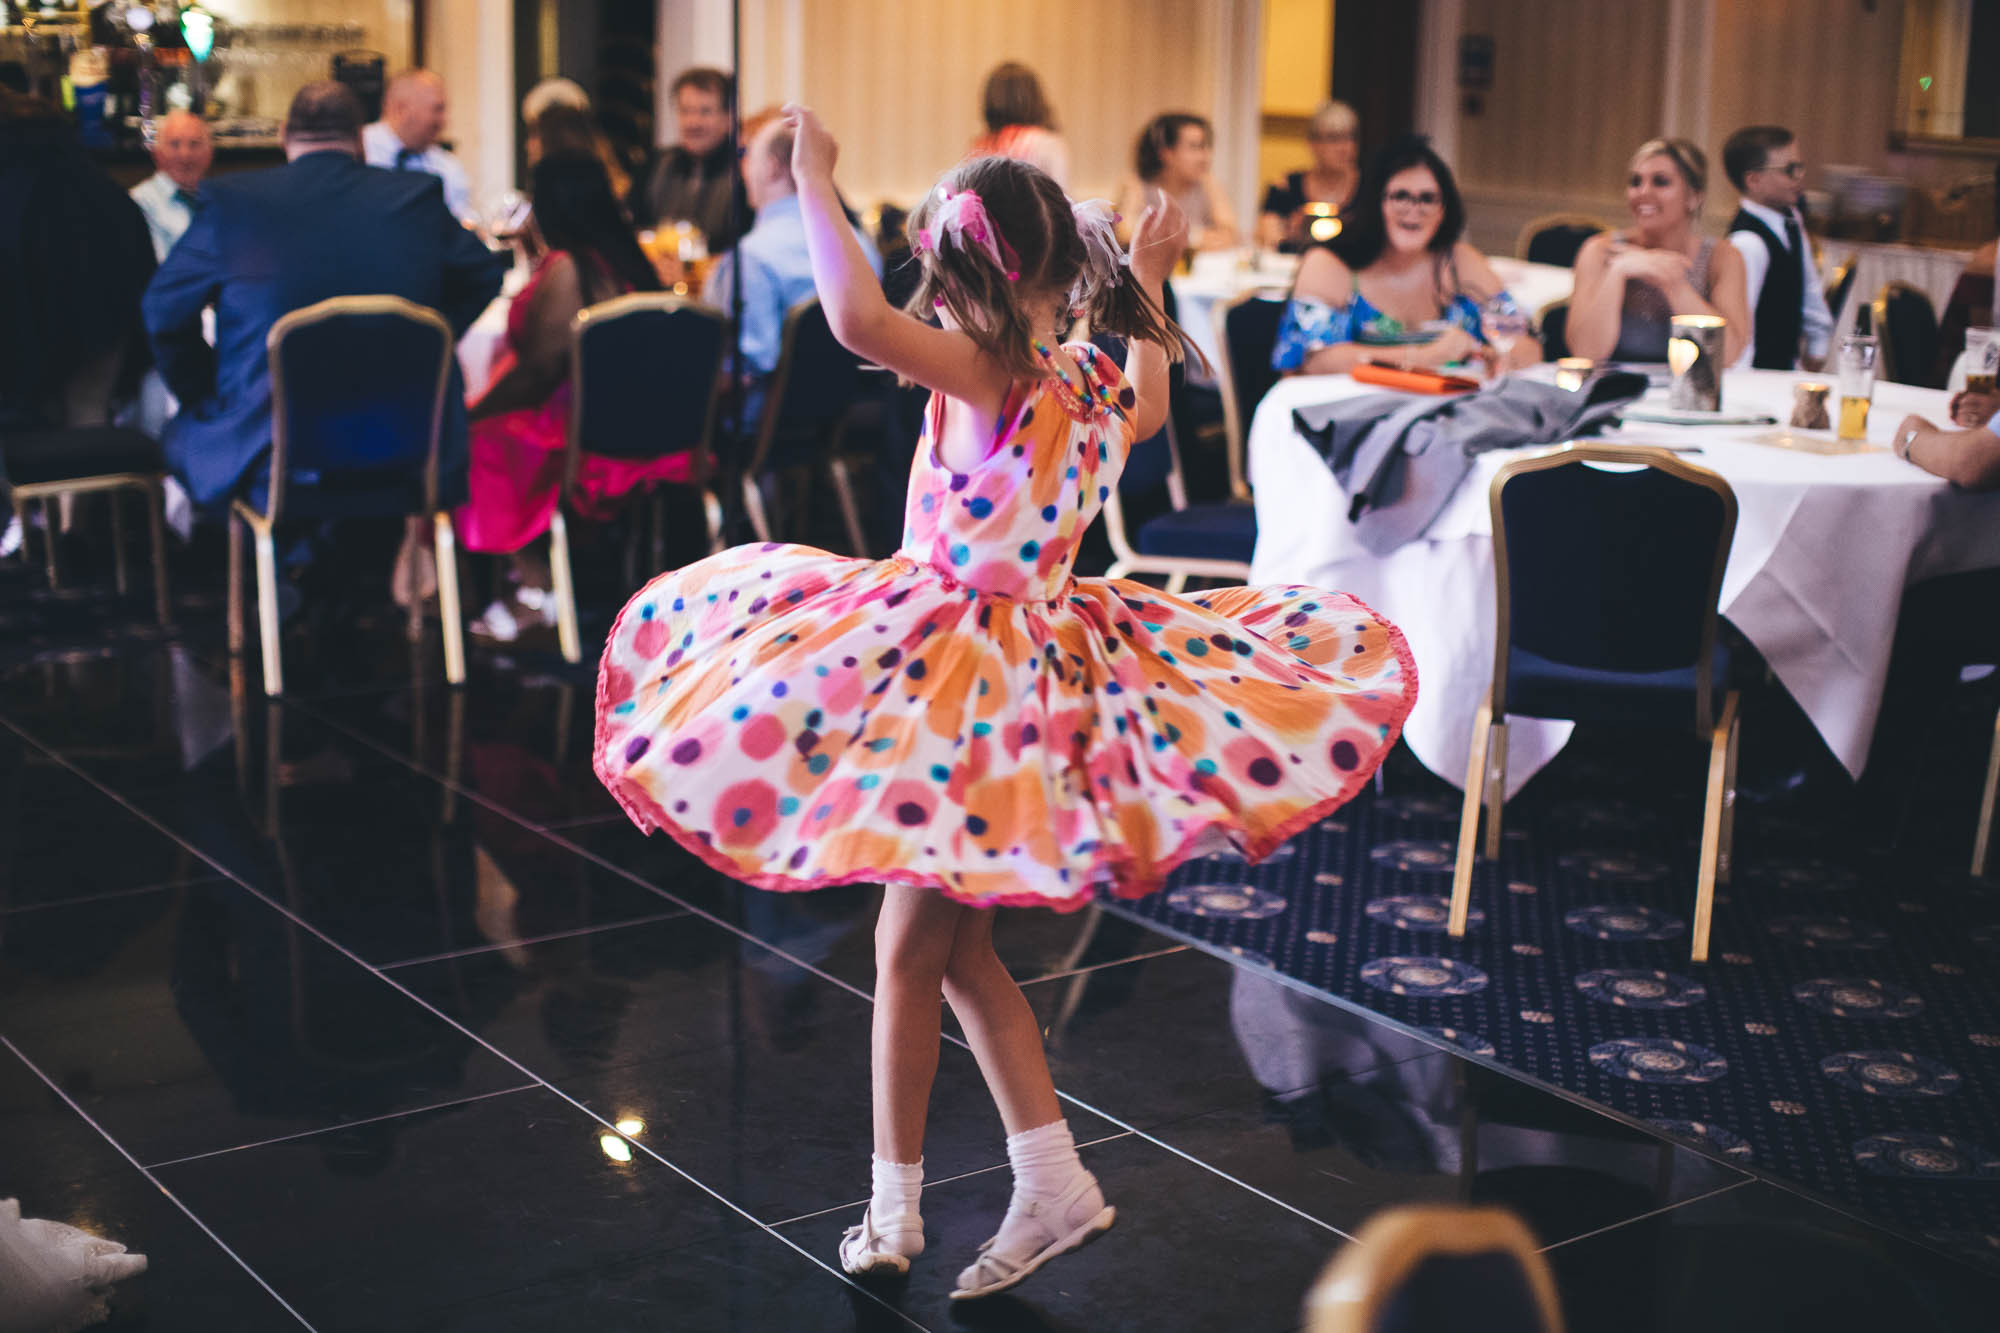 Young girl spins round on dance floor showing off her colourful dress at wedding reception